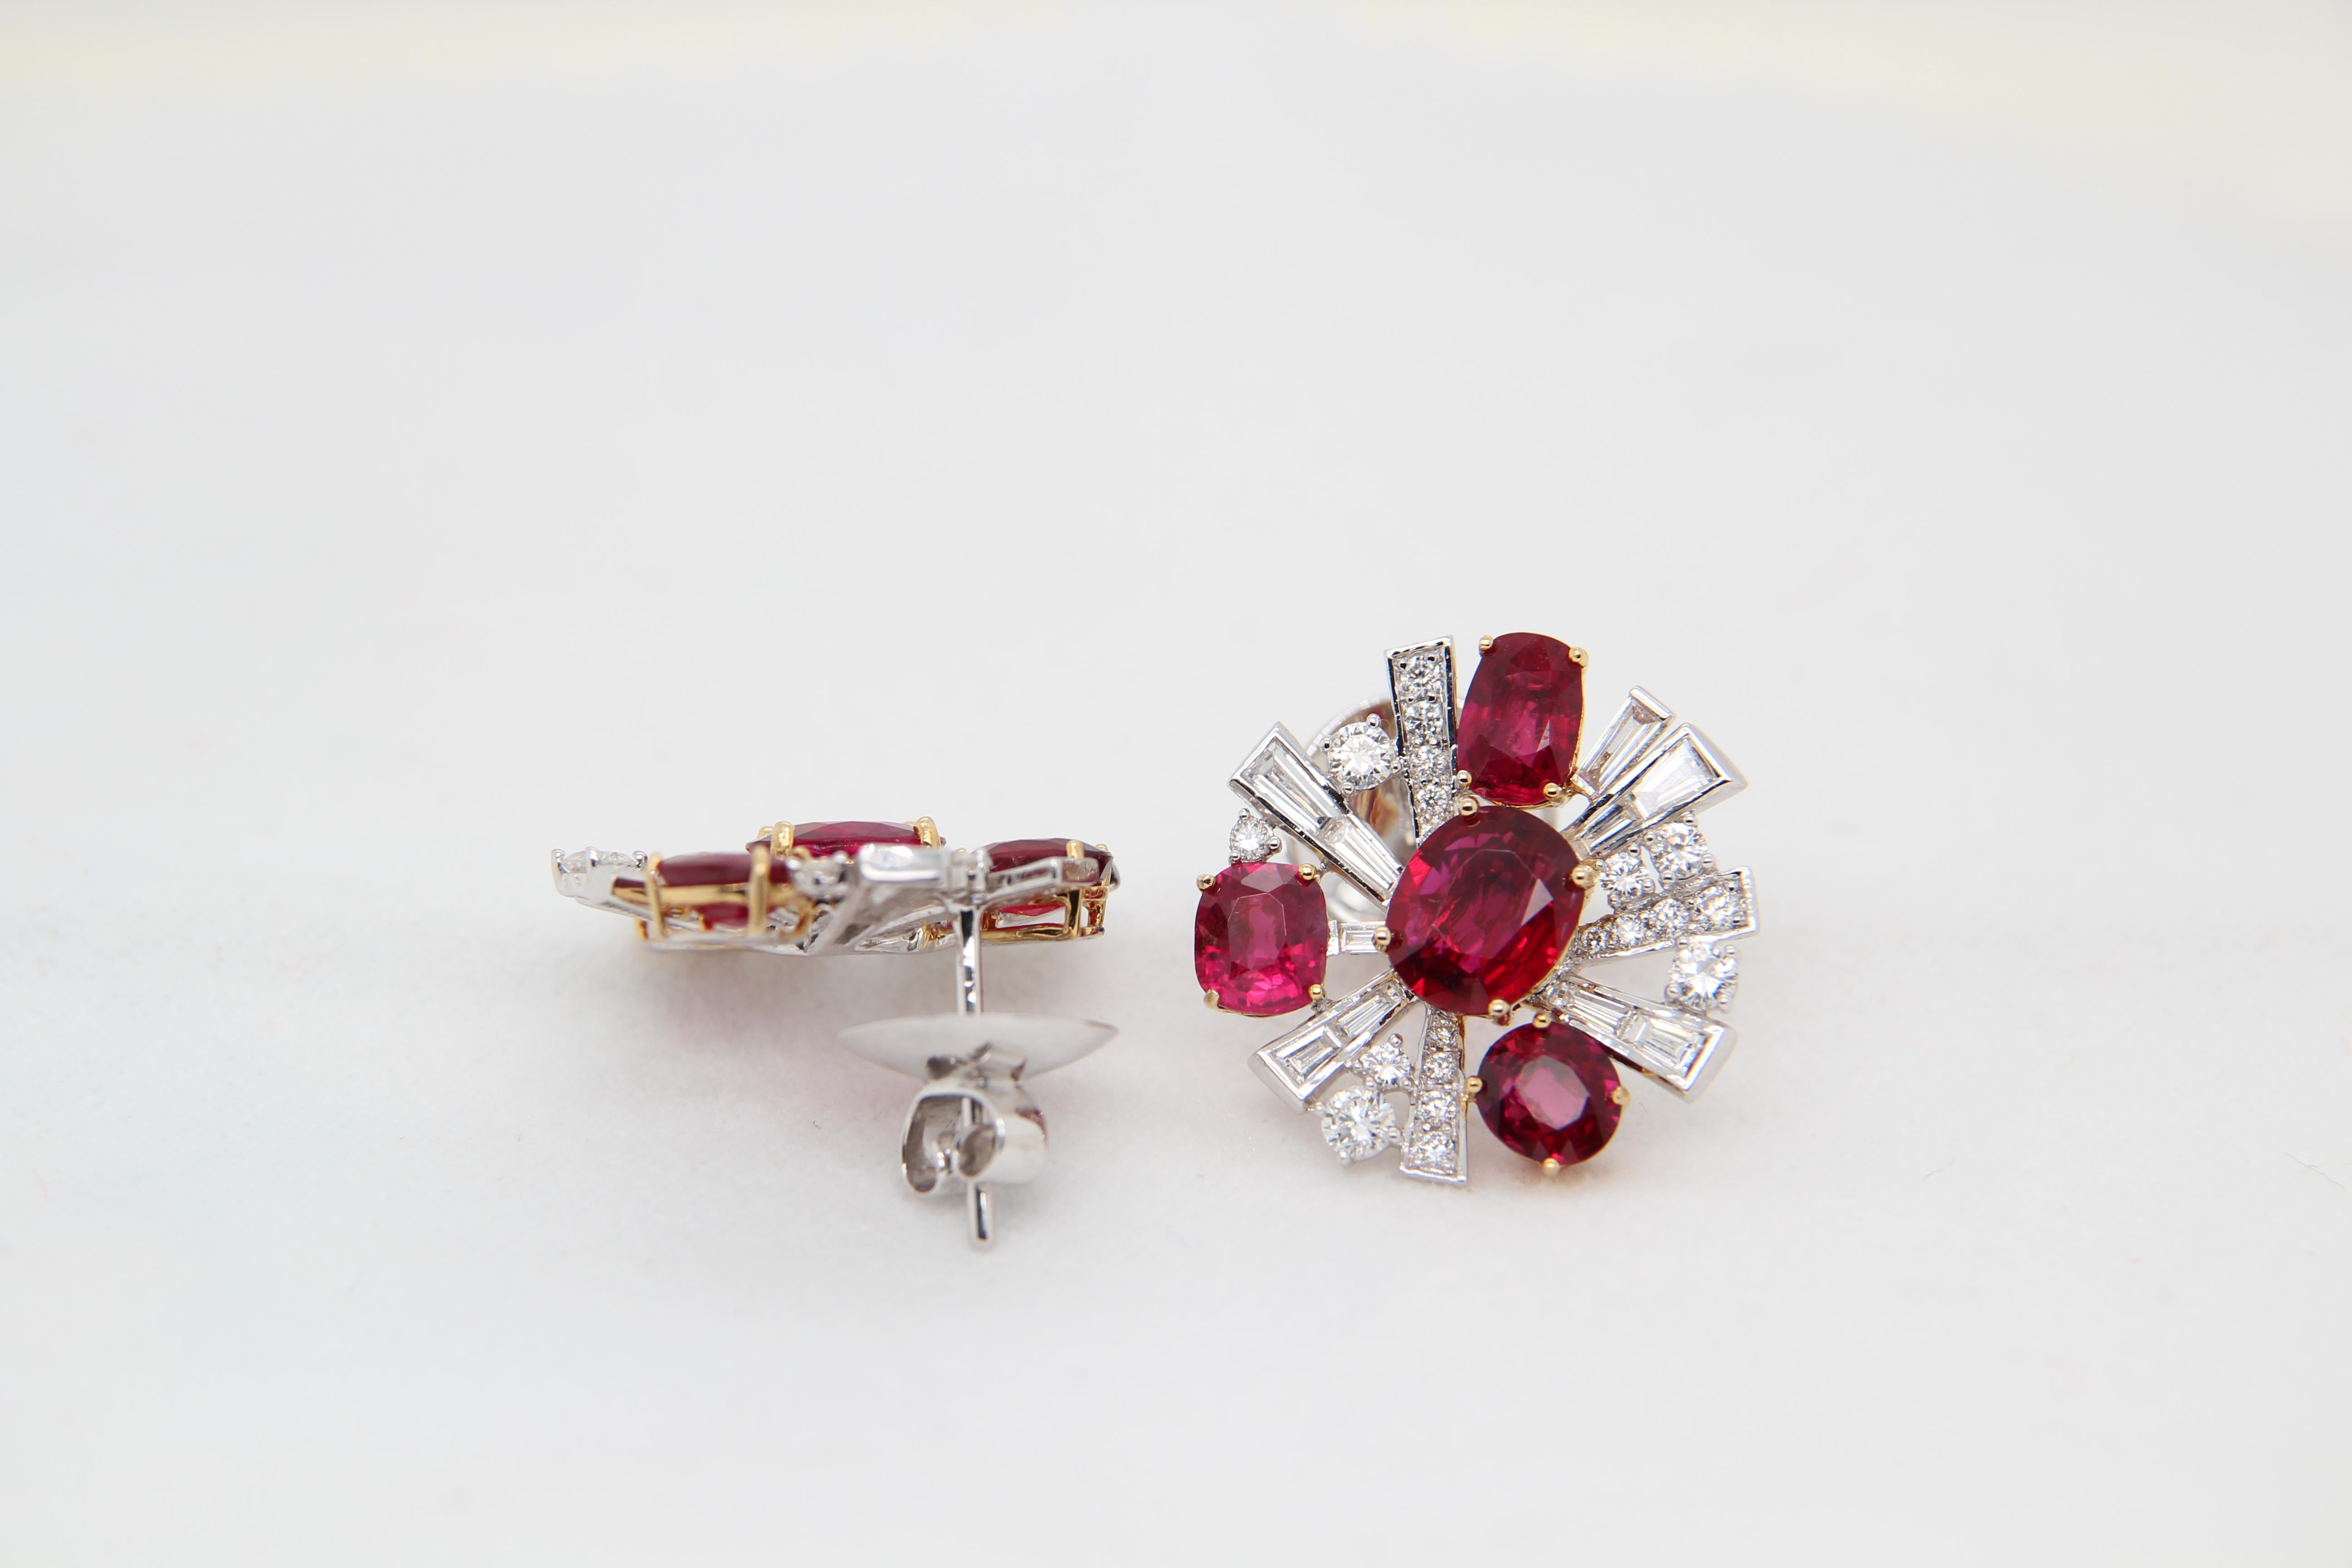 Earrings made from Burmese unheated rubies and diamond earrings. The centre two rubies are of weight 1.05 and 1.18 carat and are both certified by Gem Research Swisslab (GRS) unheated and 'Pigeon's Blood'. The two centre stones as well as the